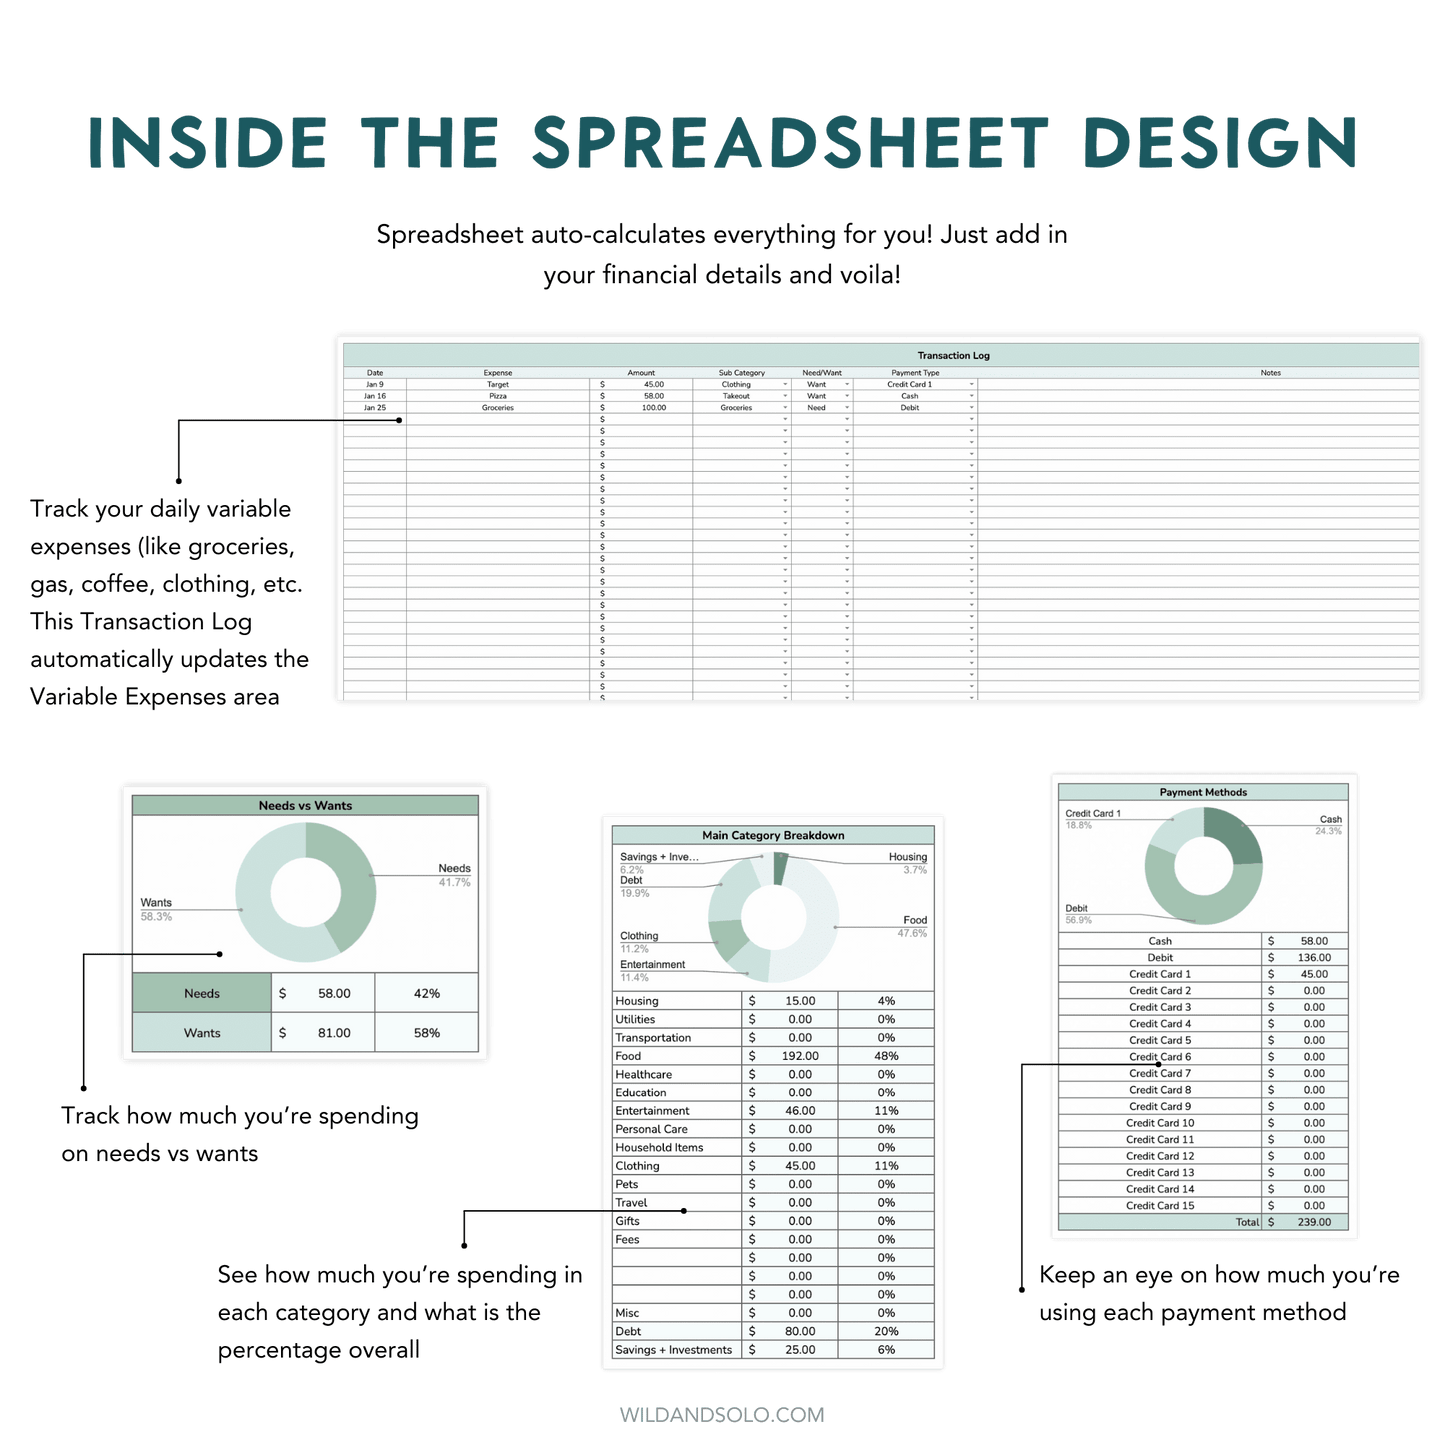 The Google Sheets Template Kit - Simple Budget Edition